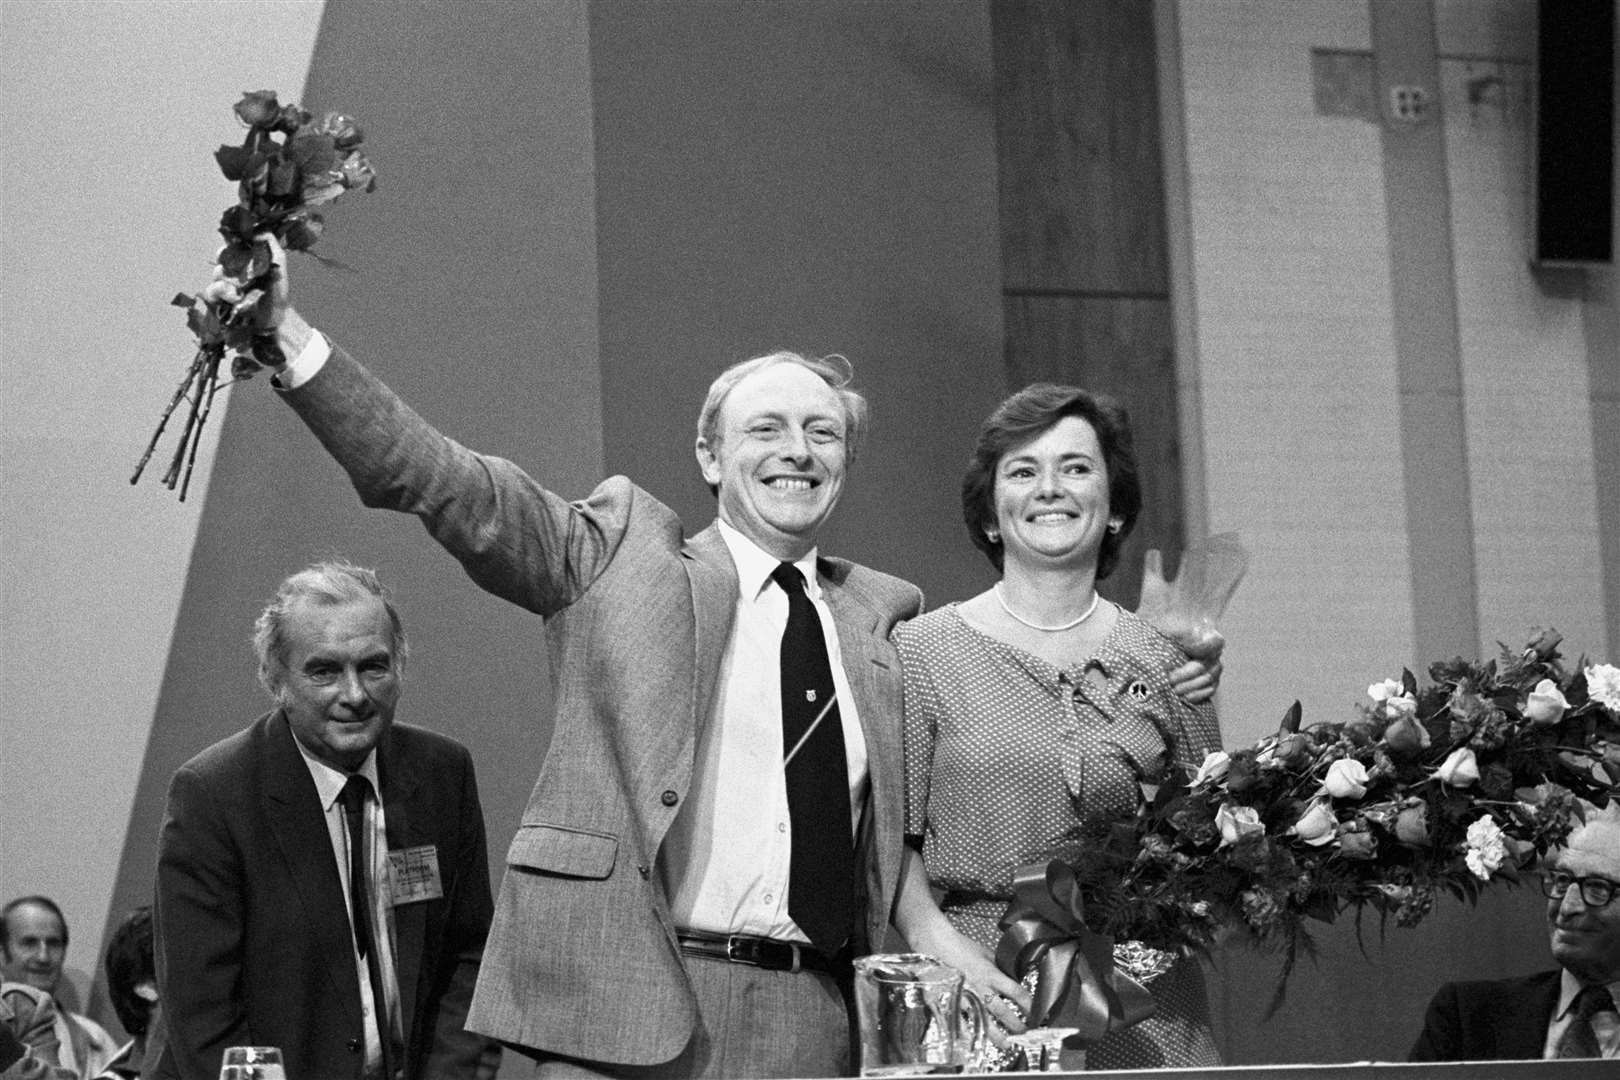 Neil Kinnock and Glenys following the announcement of his victory in the Labour Party leadership election in 1983 (PA Images)